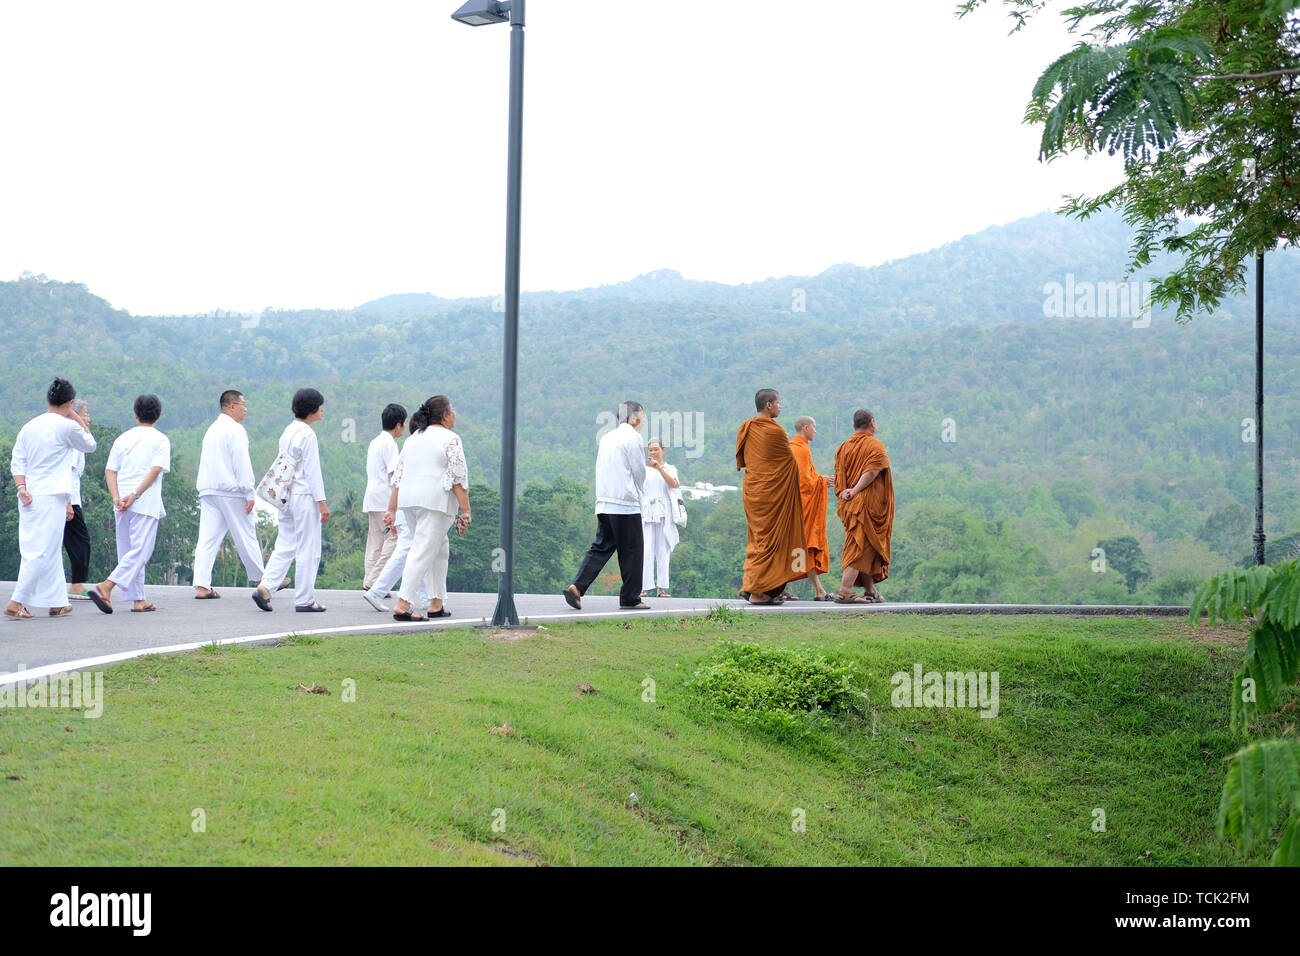 Chiang Mai, Thailand -  May 29, 2019: buddhist monk and people walking for meditation in Chiang Mai university in Chiang Mai, Thailand on May 29, 2019 Stock Photo